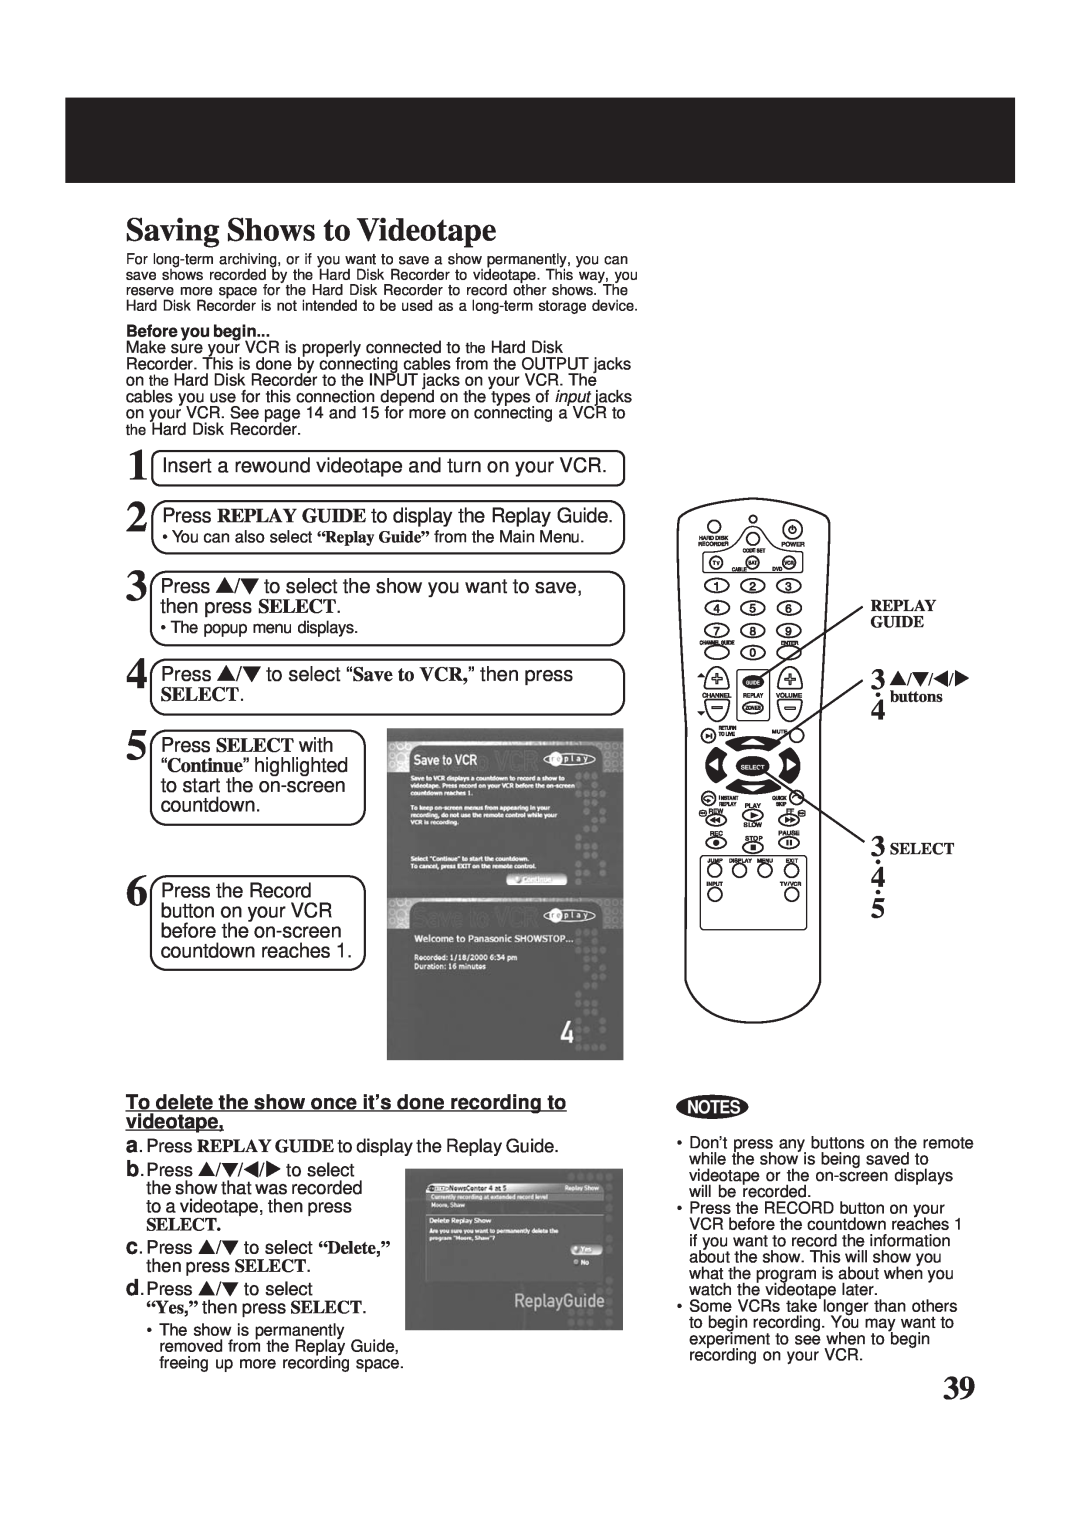 Panasonic PV-HS2000 Saving Shows to Videotape, Insert a rewound videotape and turn on your VCR, Select, Before you begin 